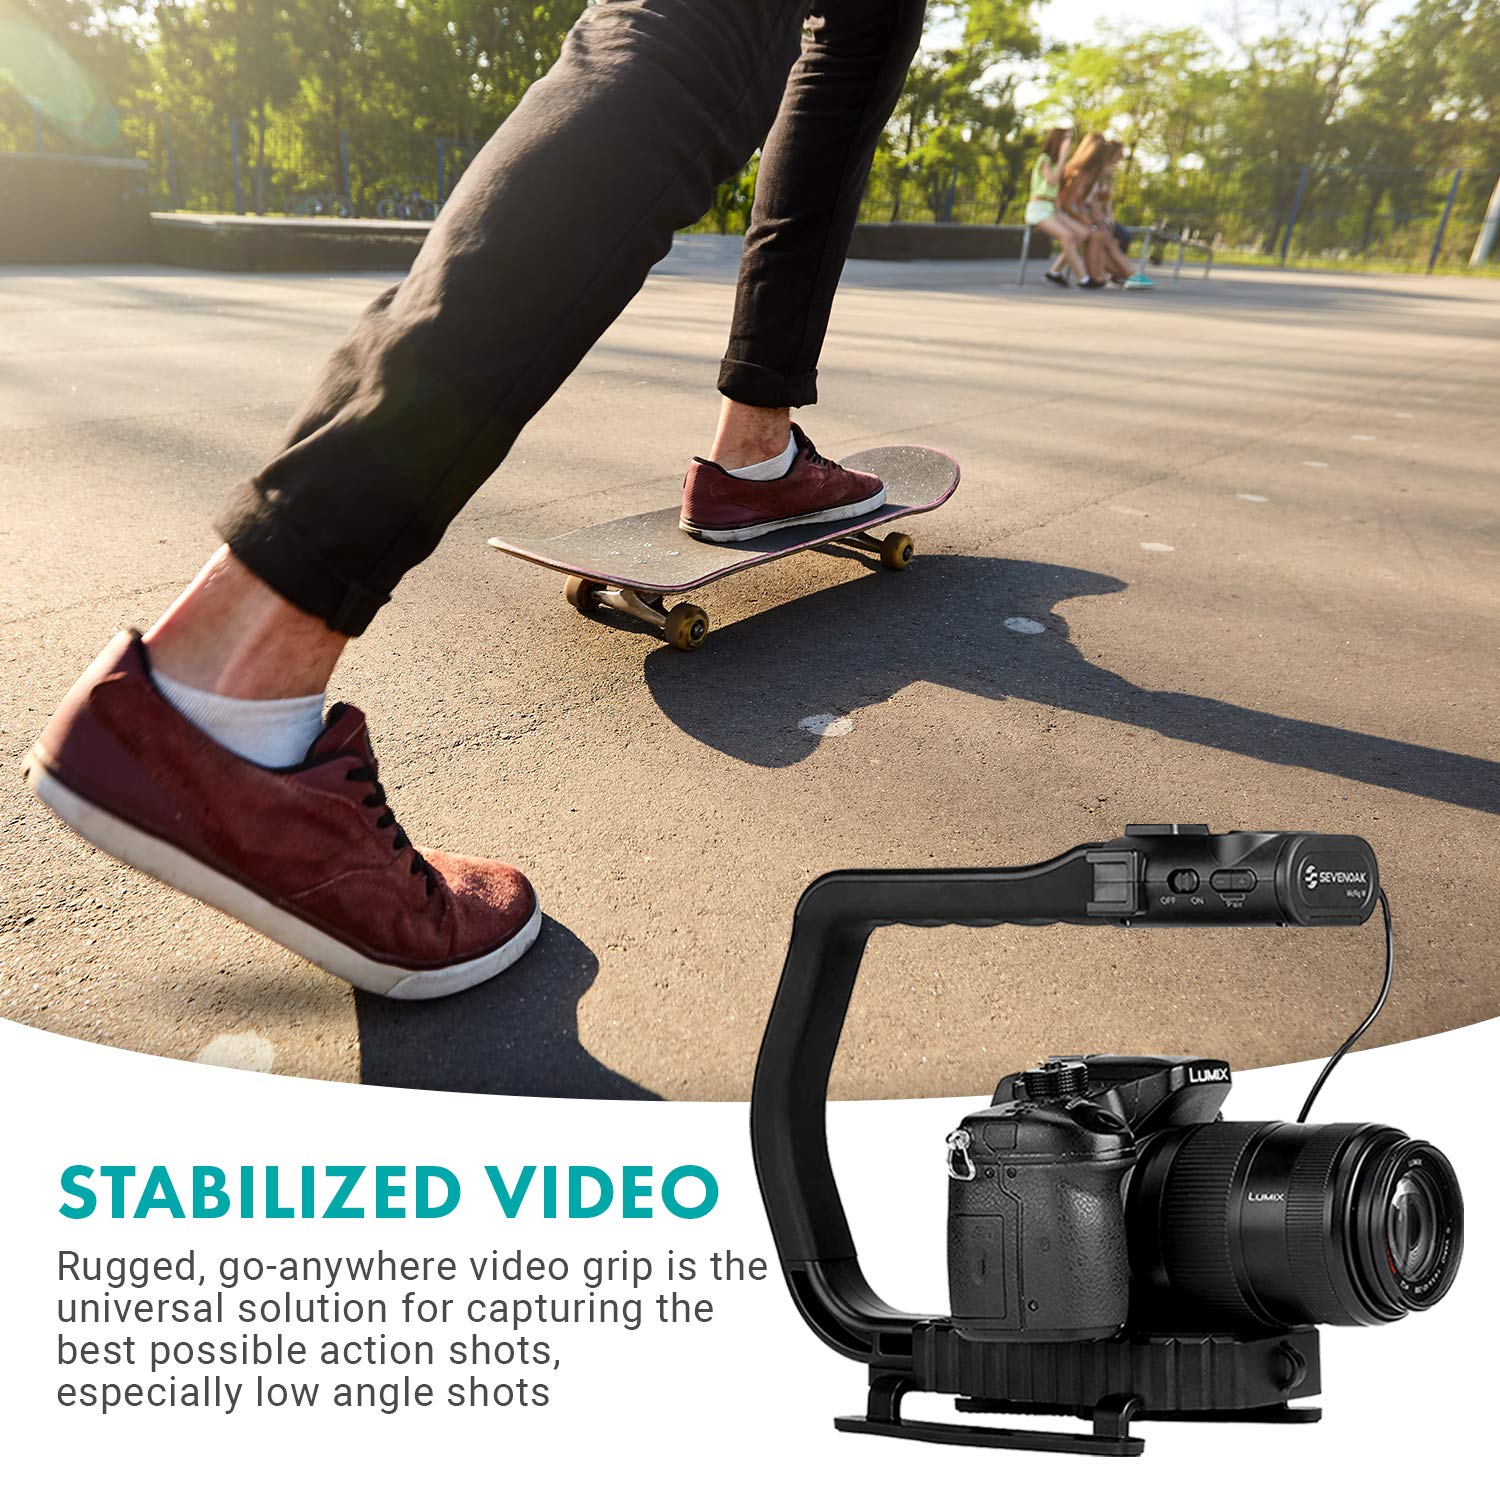 Movo MicRig-W2 Wireless Microphone Filmmaker Kit - Video Handle Stabilizer with Built-in Dual Wireless Lavalier Microphone Compatible with Canon EOS, Nikon, Sony, Panasonic DSLR and Mirrorless Cameras  - Good